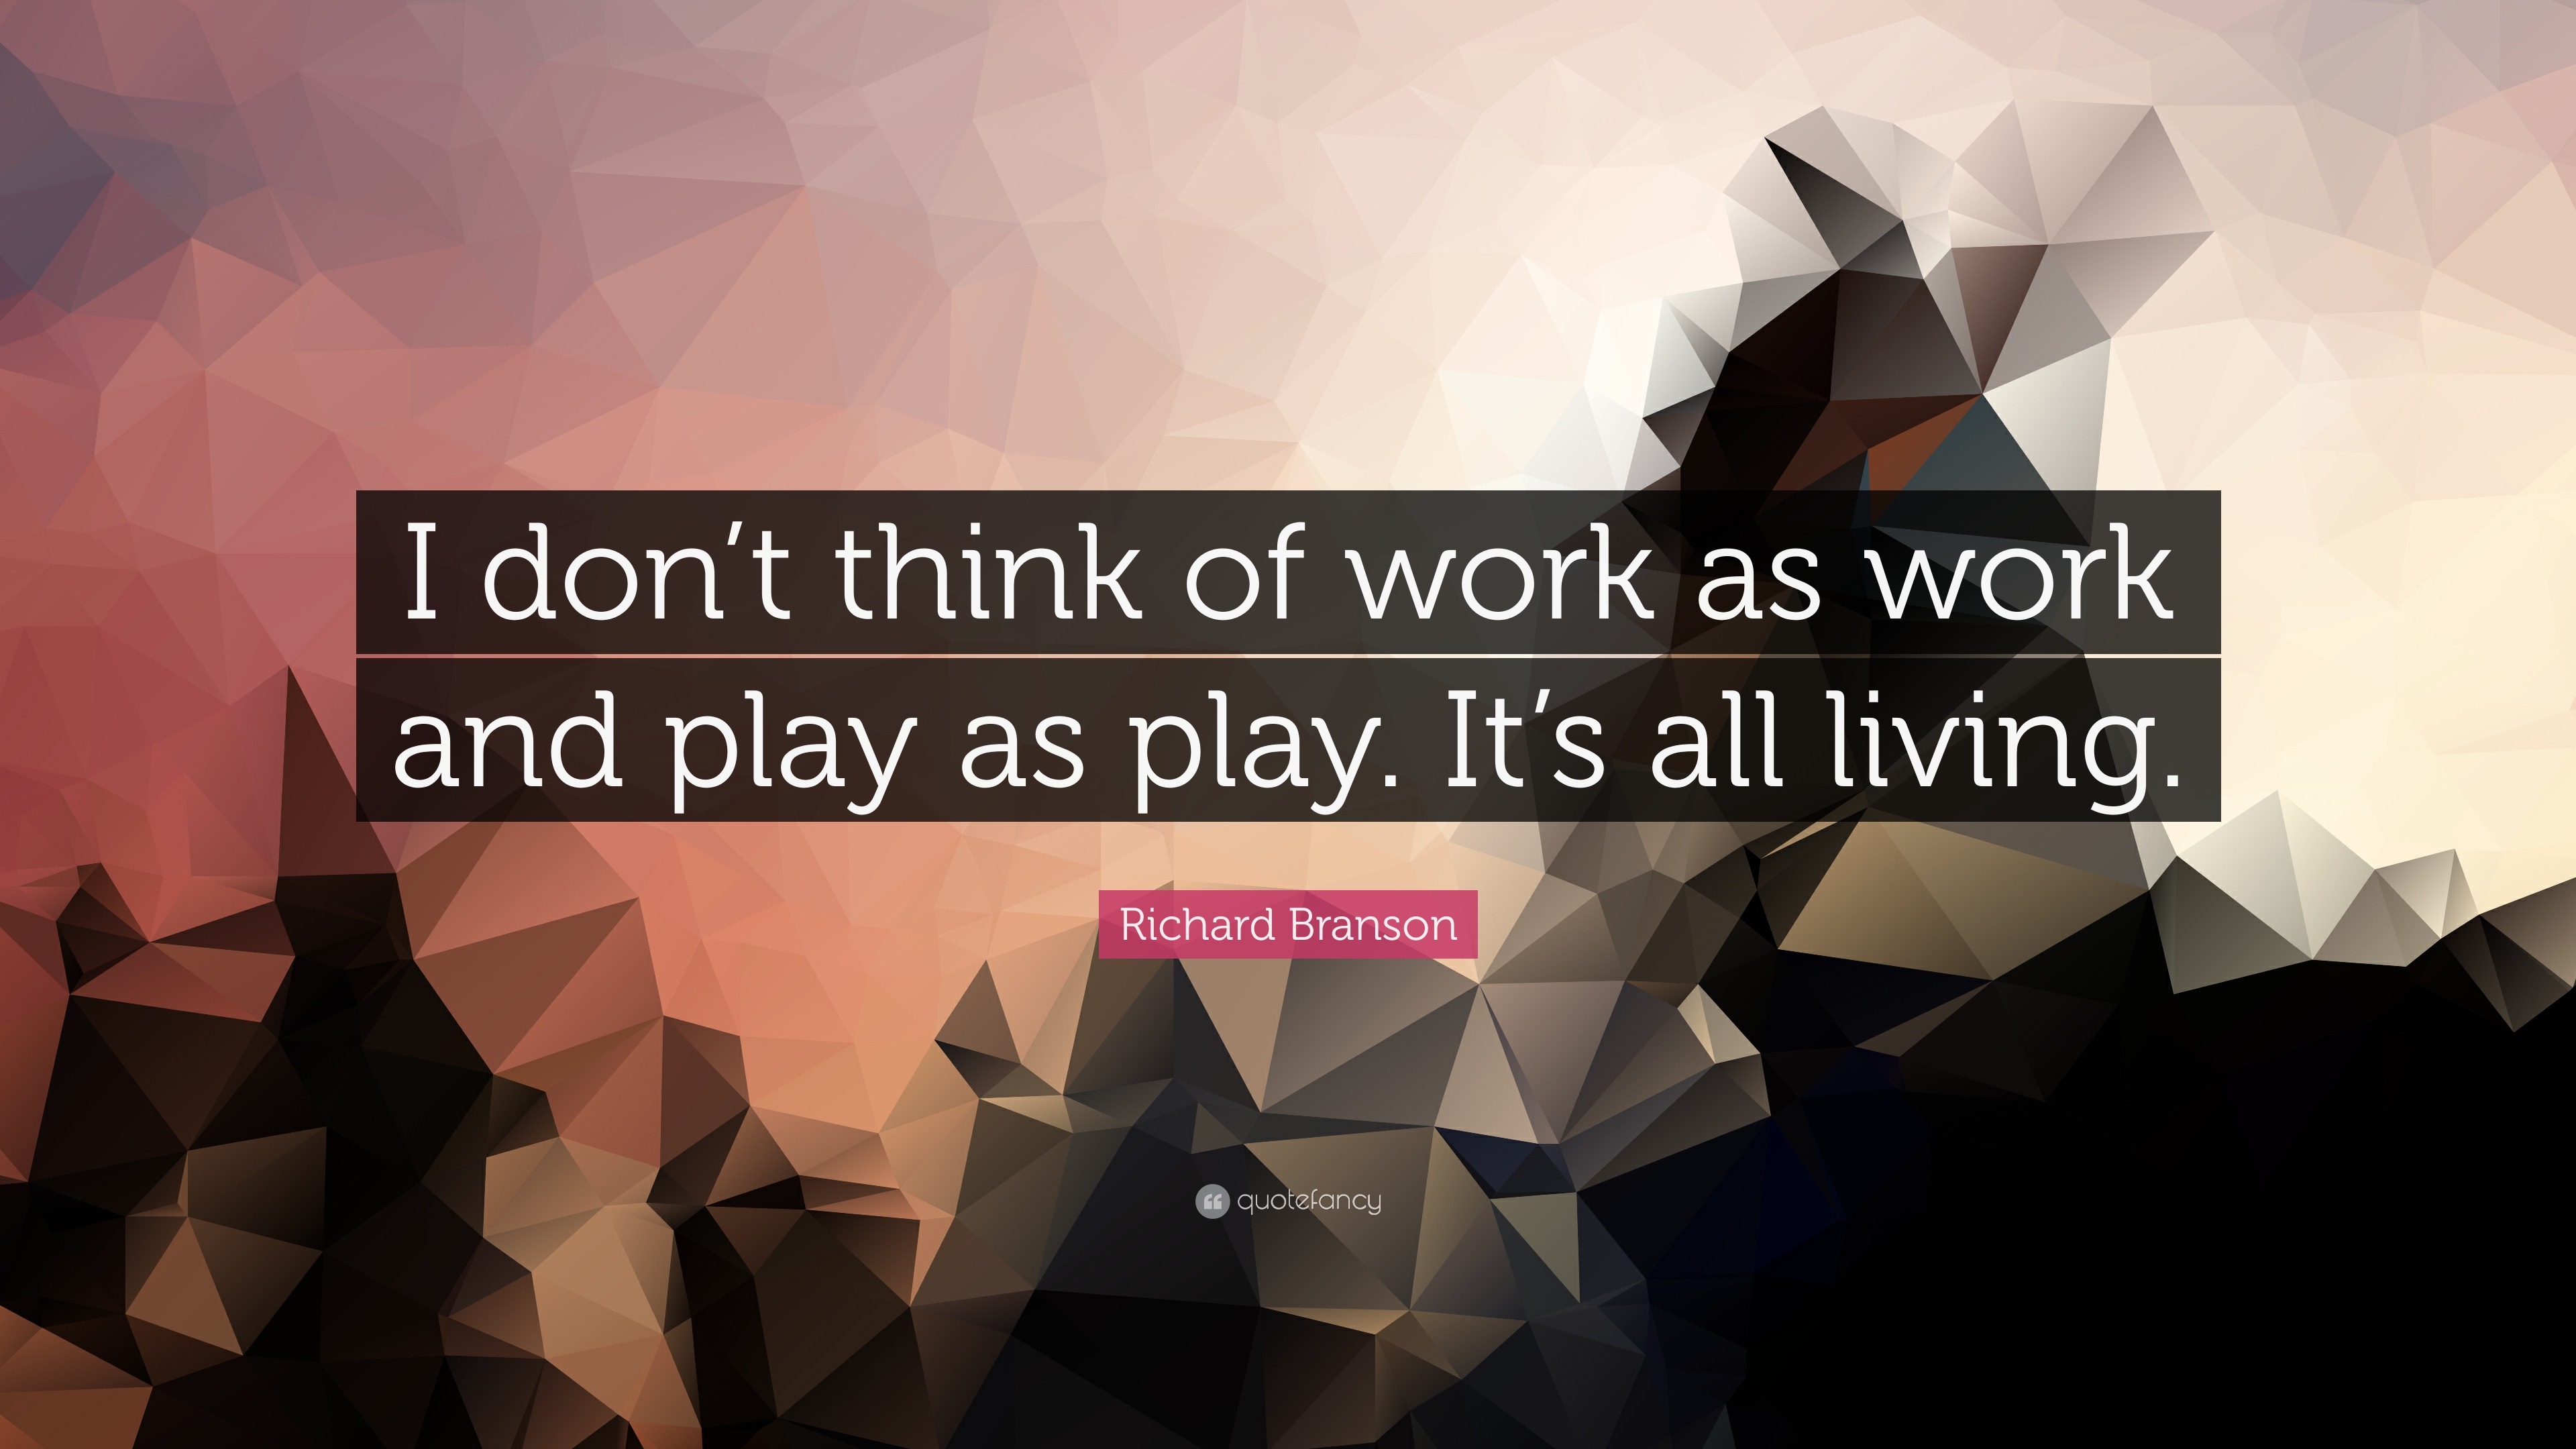 Richard Branson Quote: "I don't think of work as work and play as play. It's all living." (13 ...